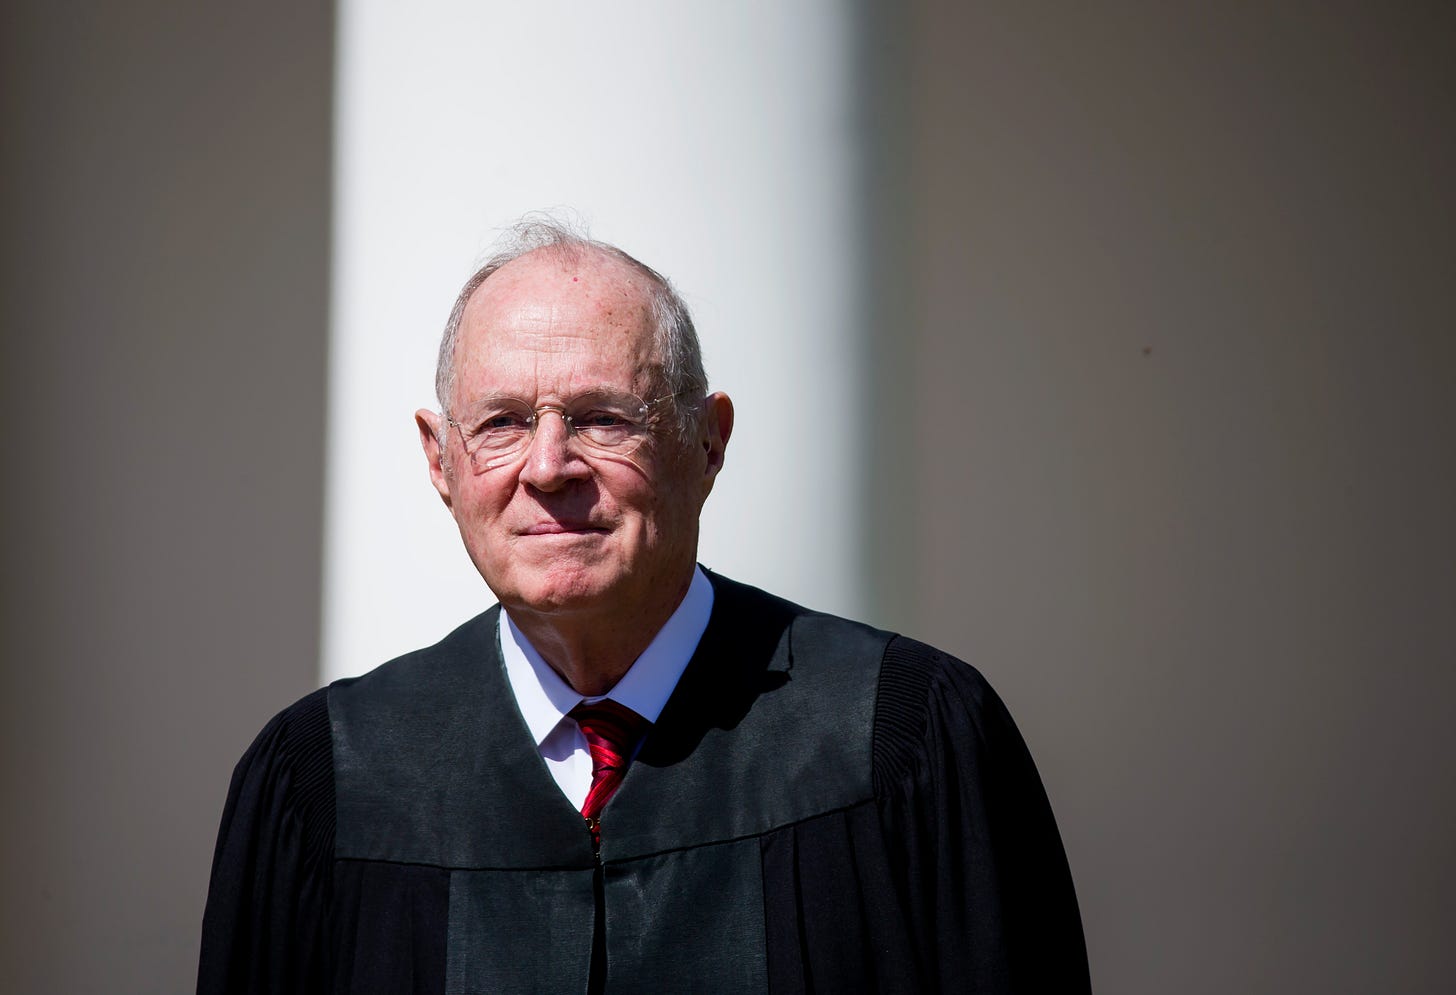 Obergefell: Anthony Kennedy Retiring Threatens All We Won | Time